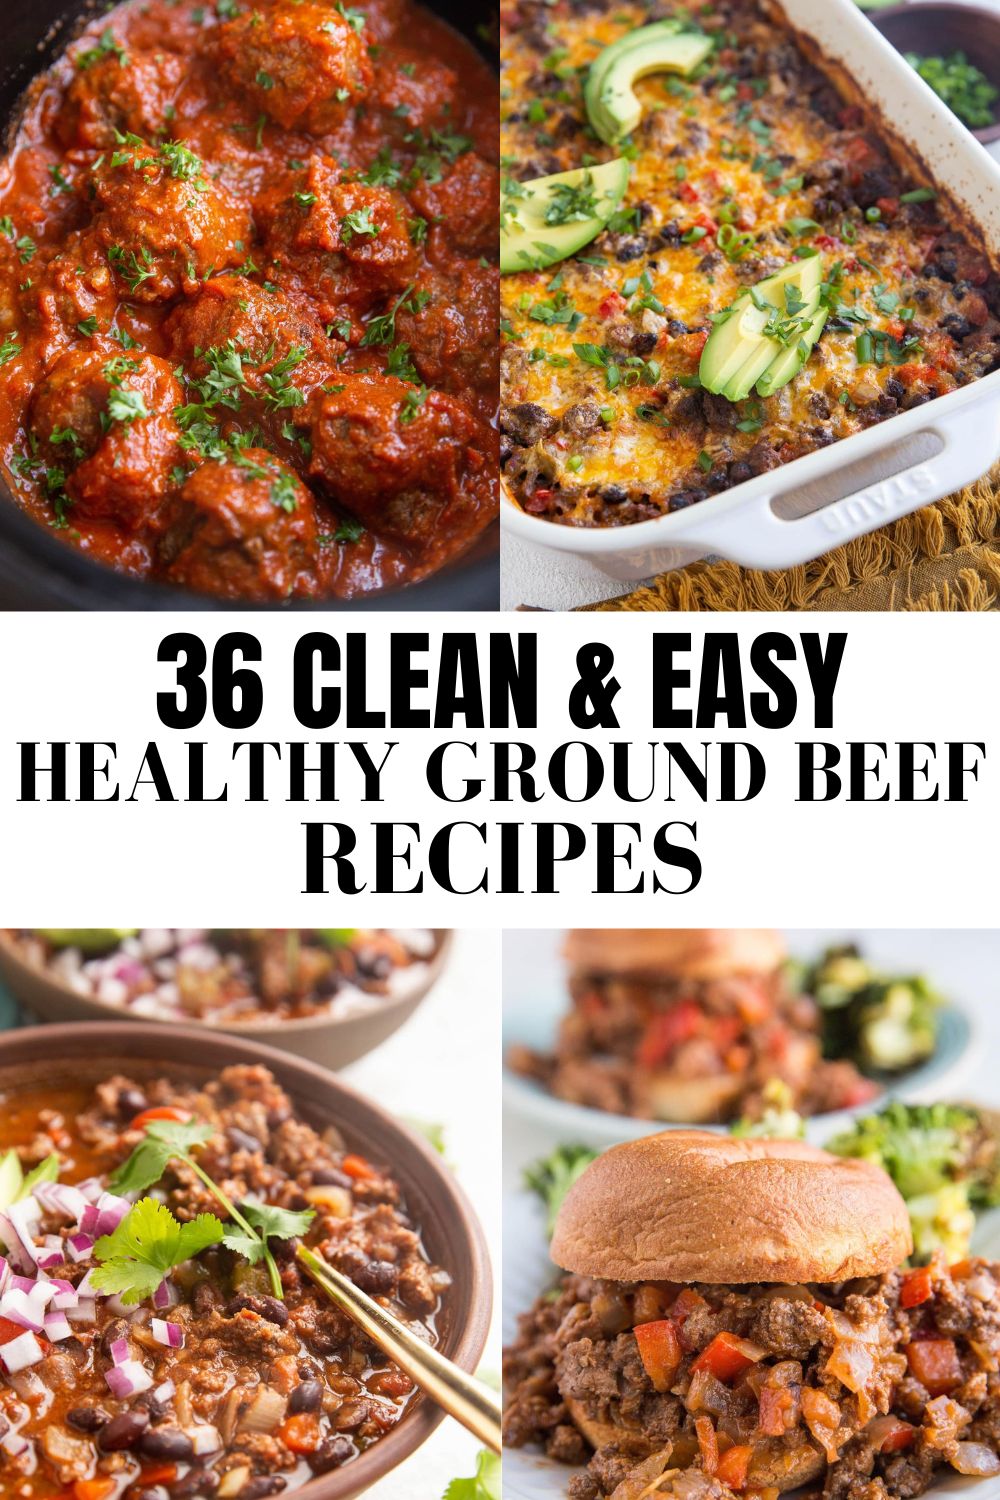 Chicken And Ground Beef Recipes: Delicious and Easy Meal Ideas